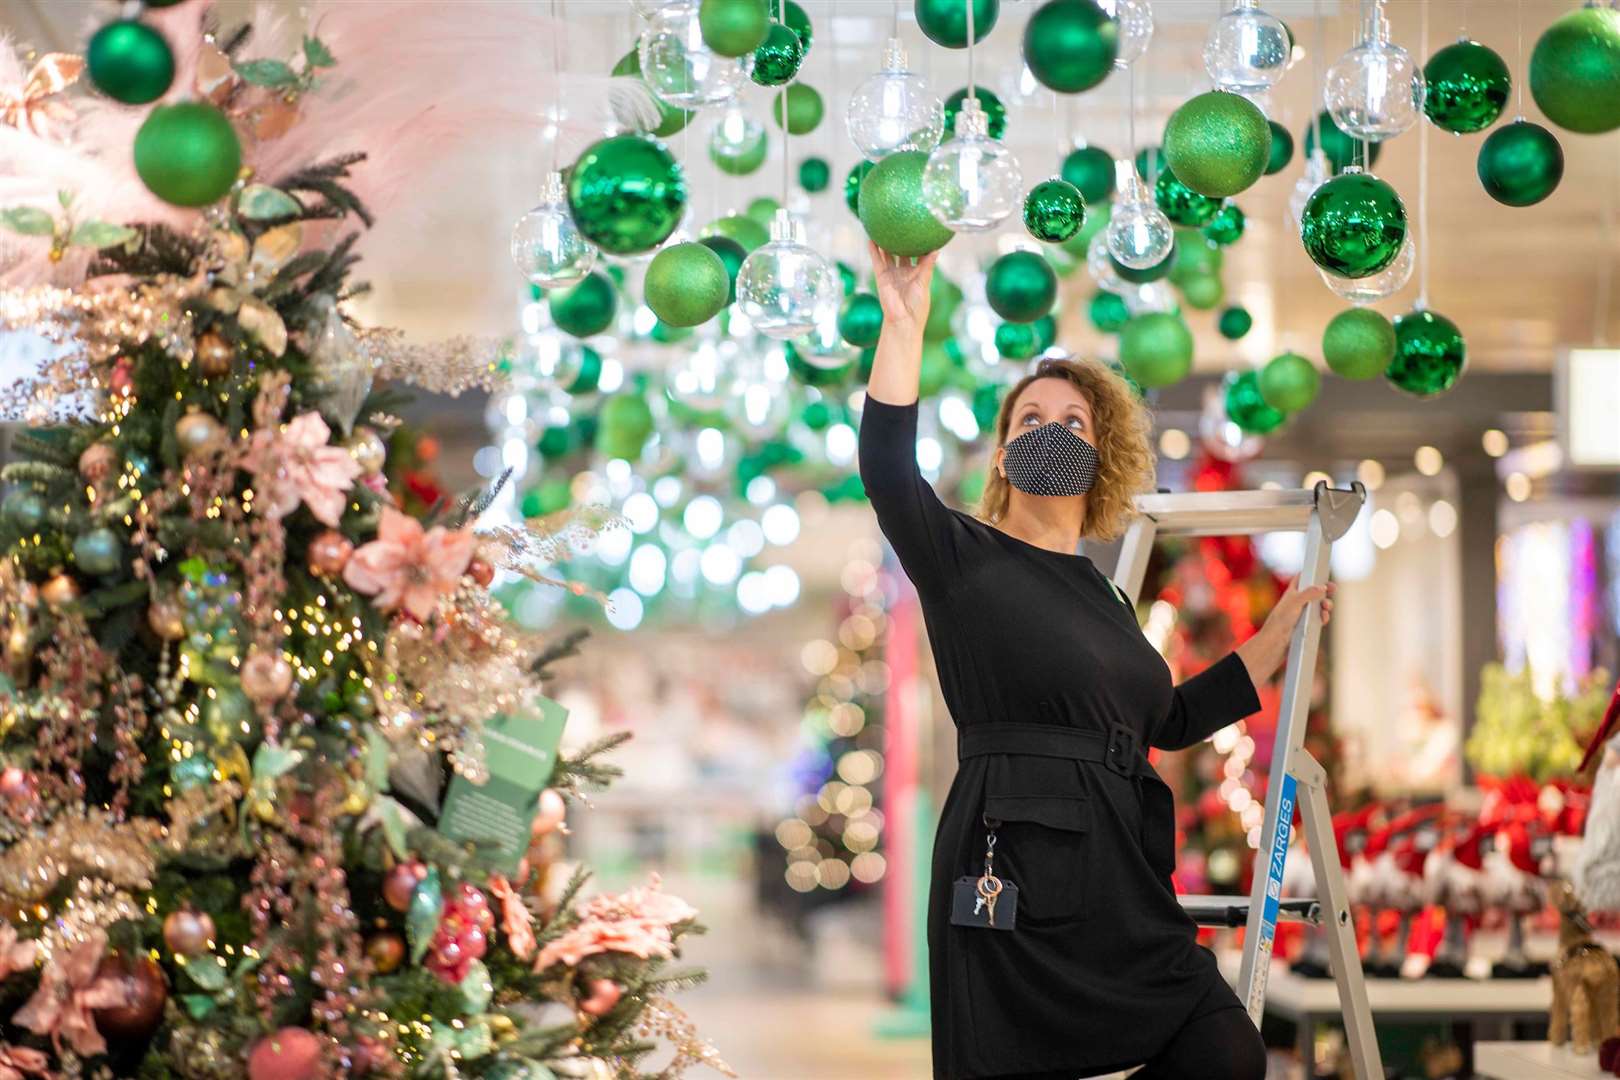 John Lewis is recruiting 7,000 staff to help support its busy Christmas period